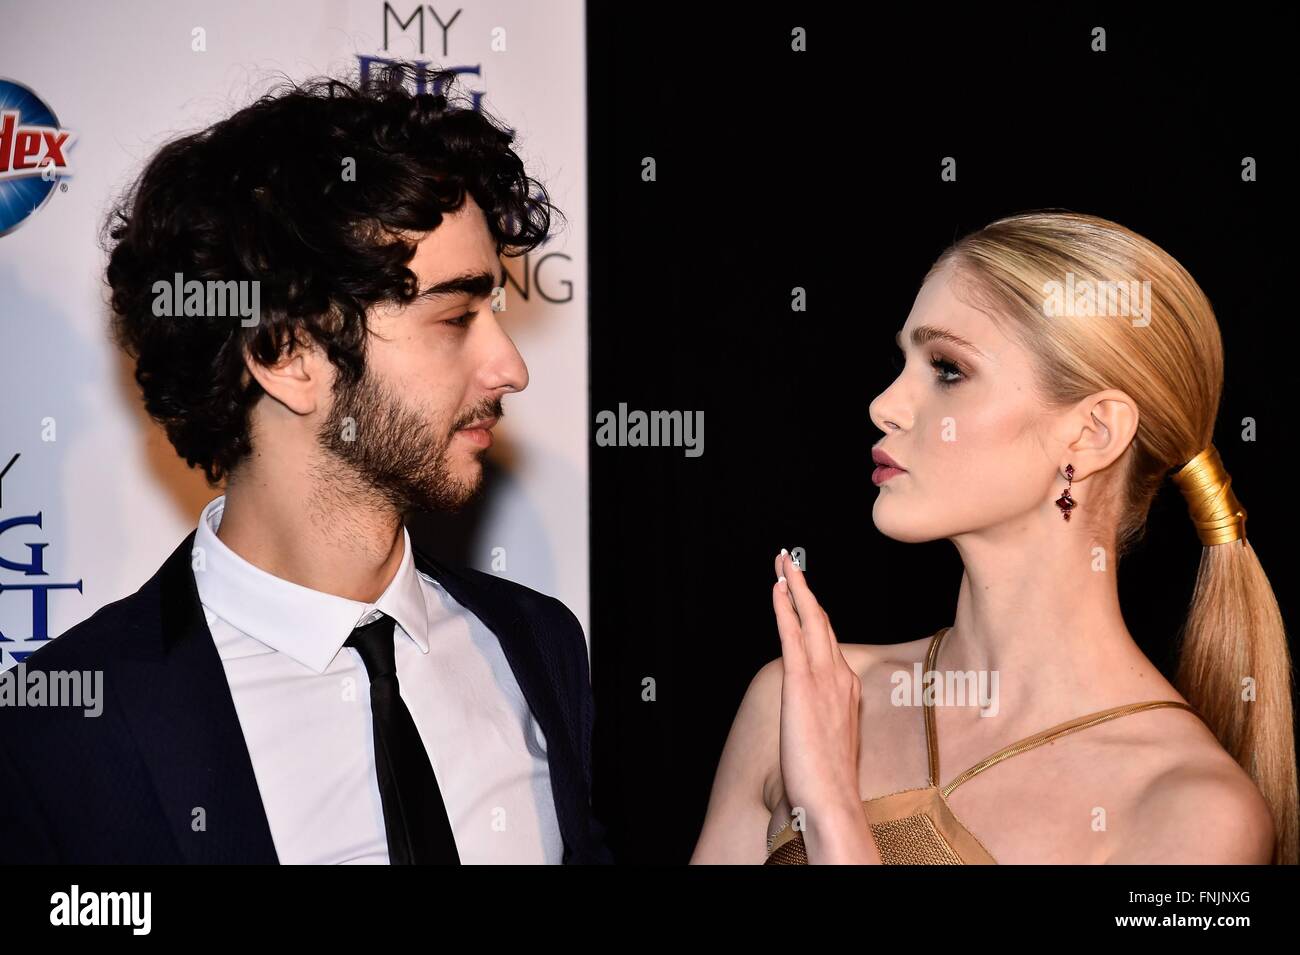 New York, NY, USA. 15th Mar, 2016. Alex Wolff, Elena Kampouris at arrivals for MY BIG FAT GREEK WEDDING 2 Premiere, AMC Loews Lincoln Sqaure, New York, NY March 15, 2016. Credit:  Steven Ferdman/Everett Collection/Alamy Live News Stock Photo